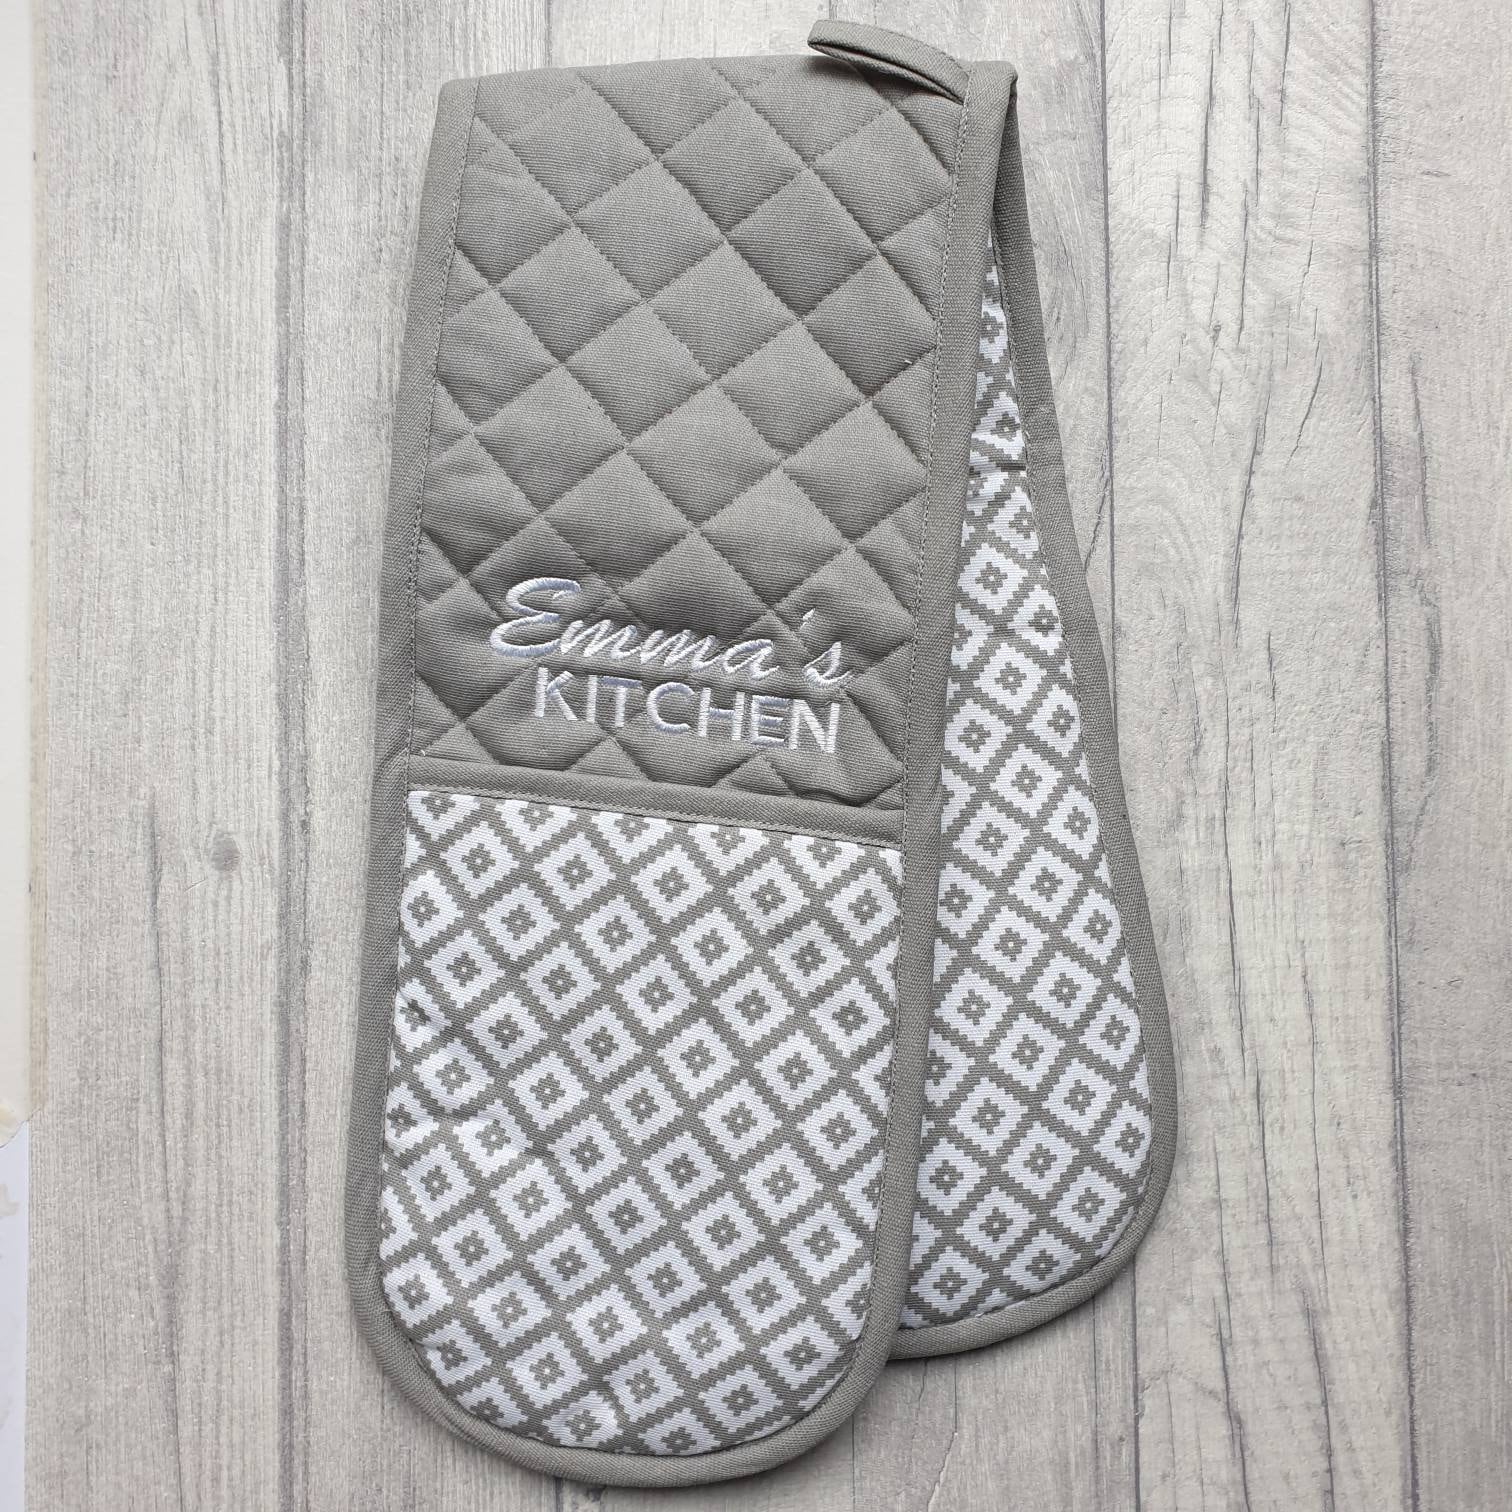 Personalised Embroidered Grey Double Oven Glove, Pot Holder, Geometric Grey  Oven Glove, Personalized Oven Mitt 